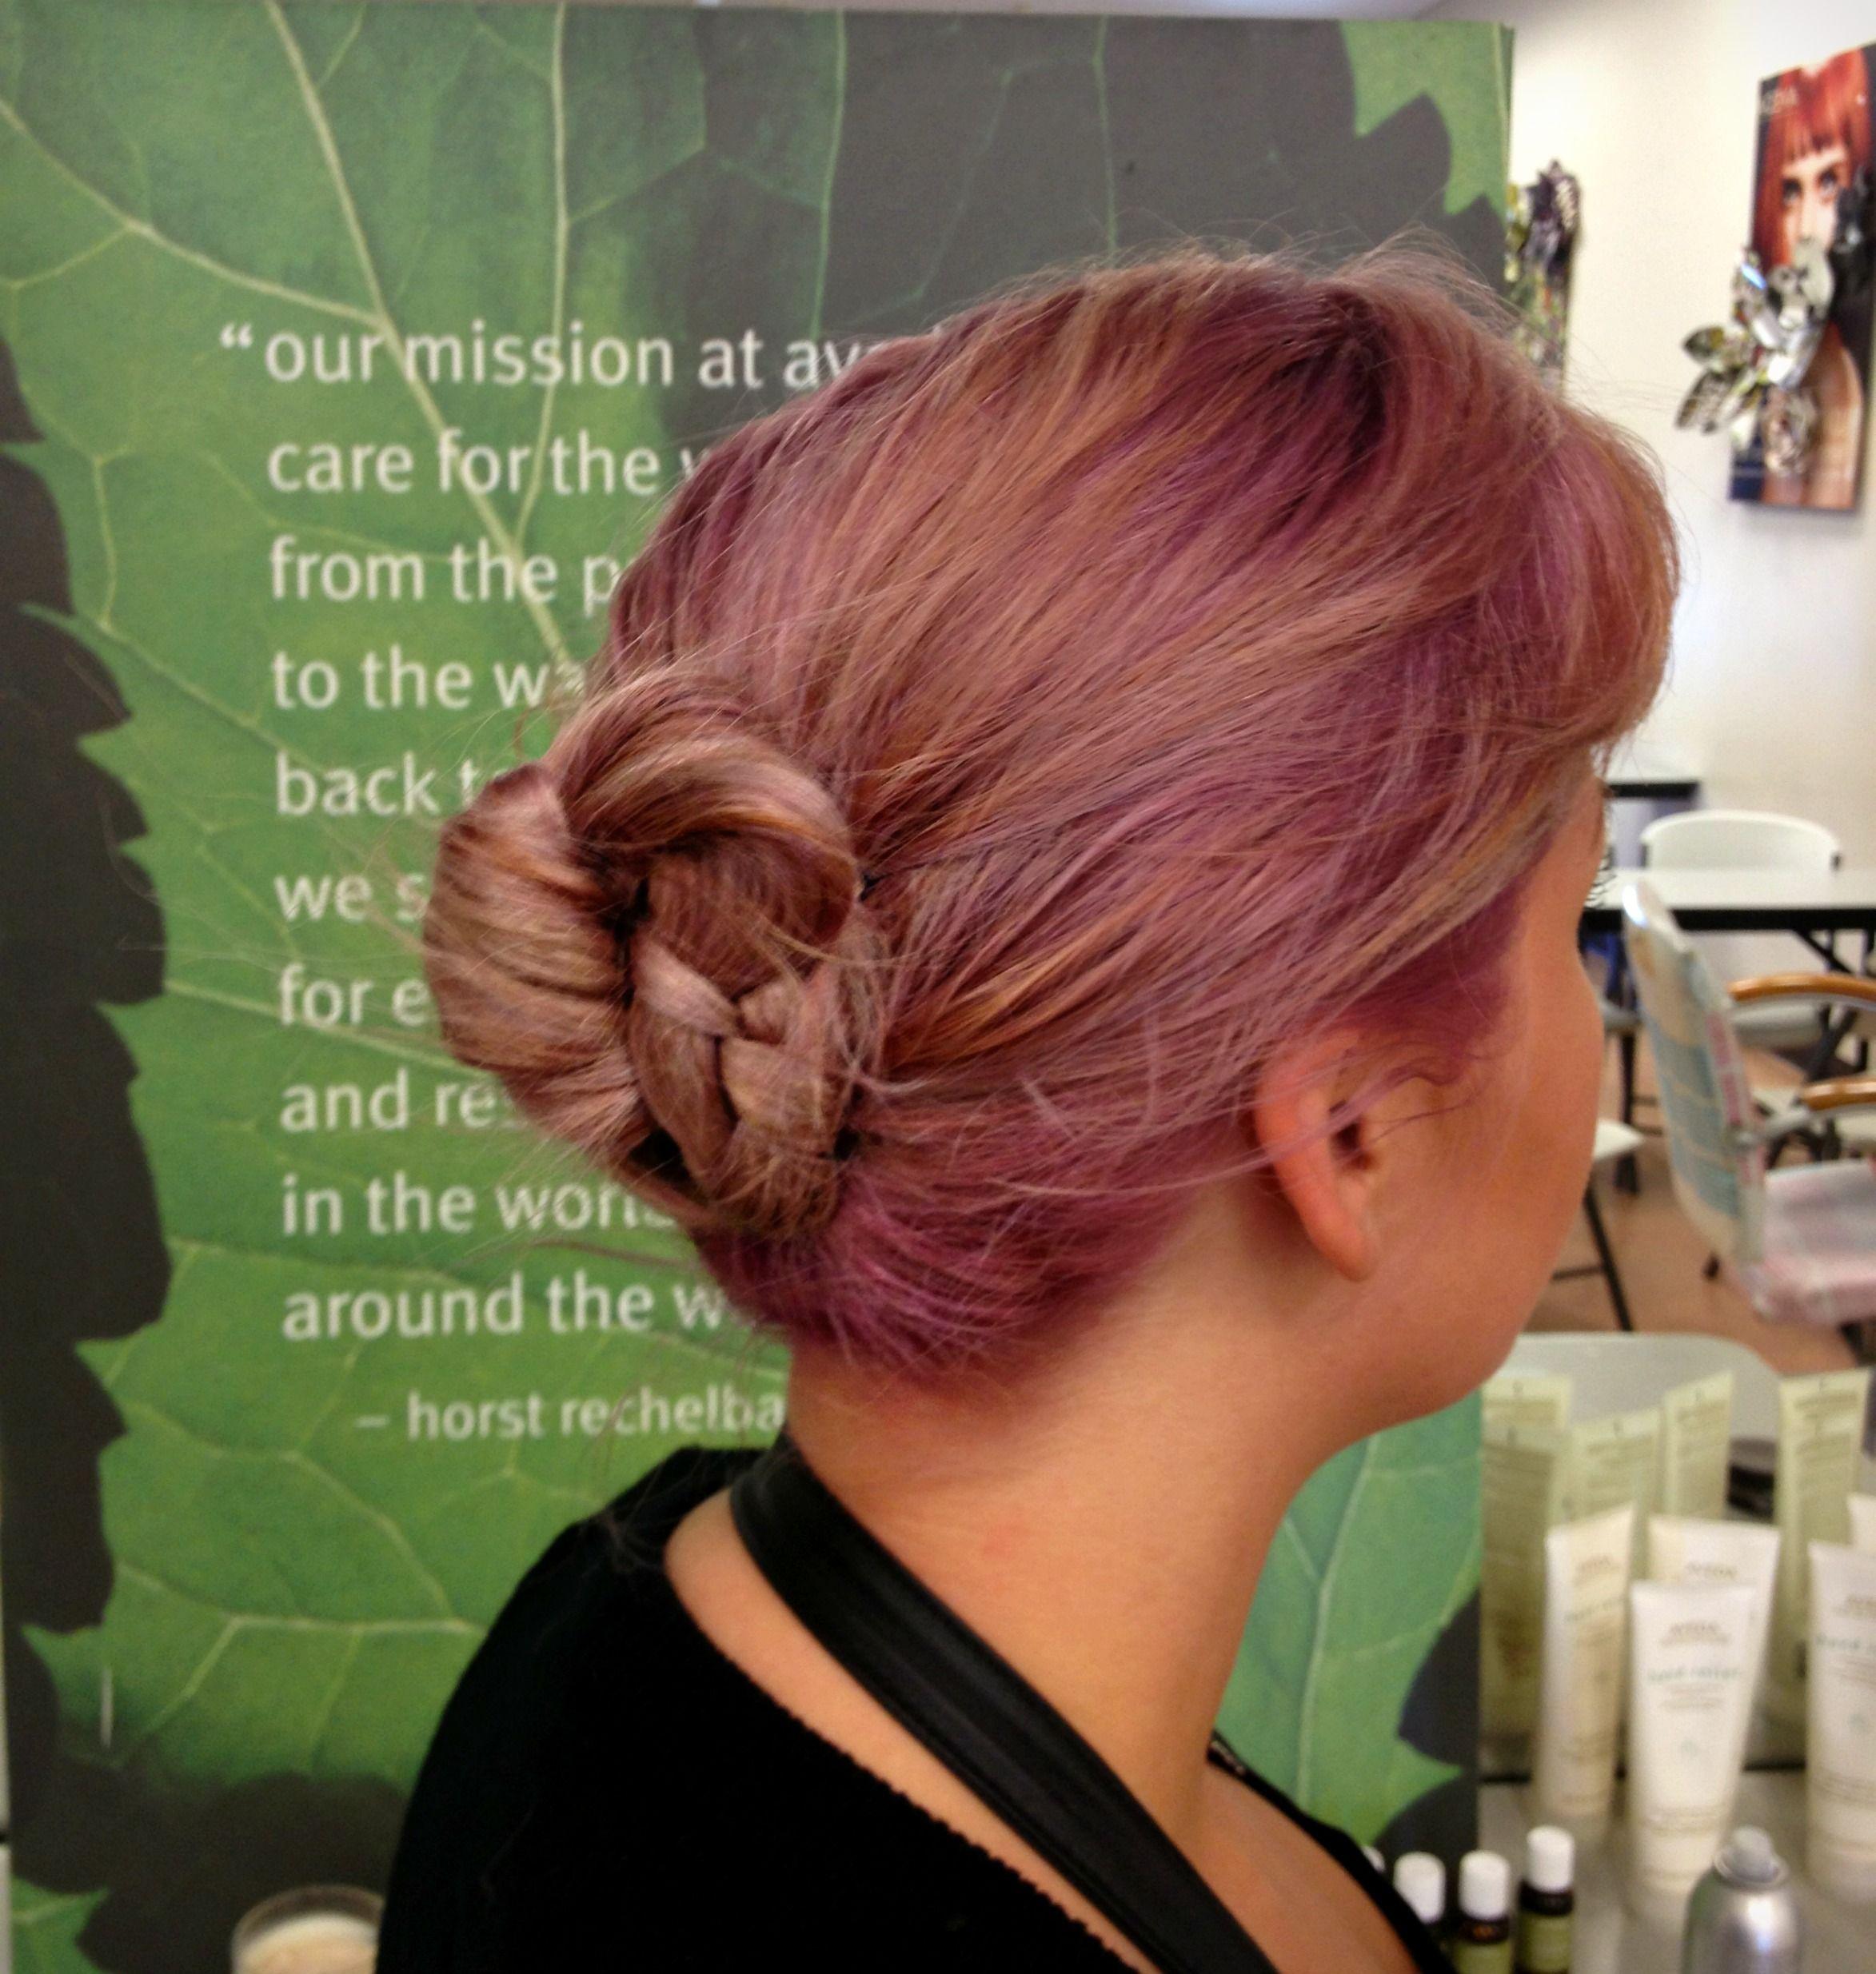 Bun With Red W Logo - Messy Braided Bun Upstyle Video Tutorial by AIP Educator Andrew ...